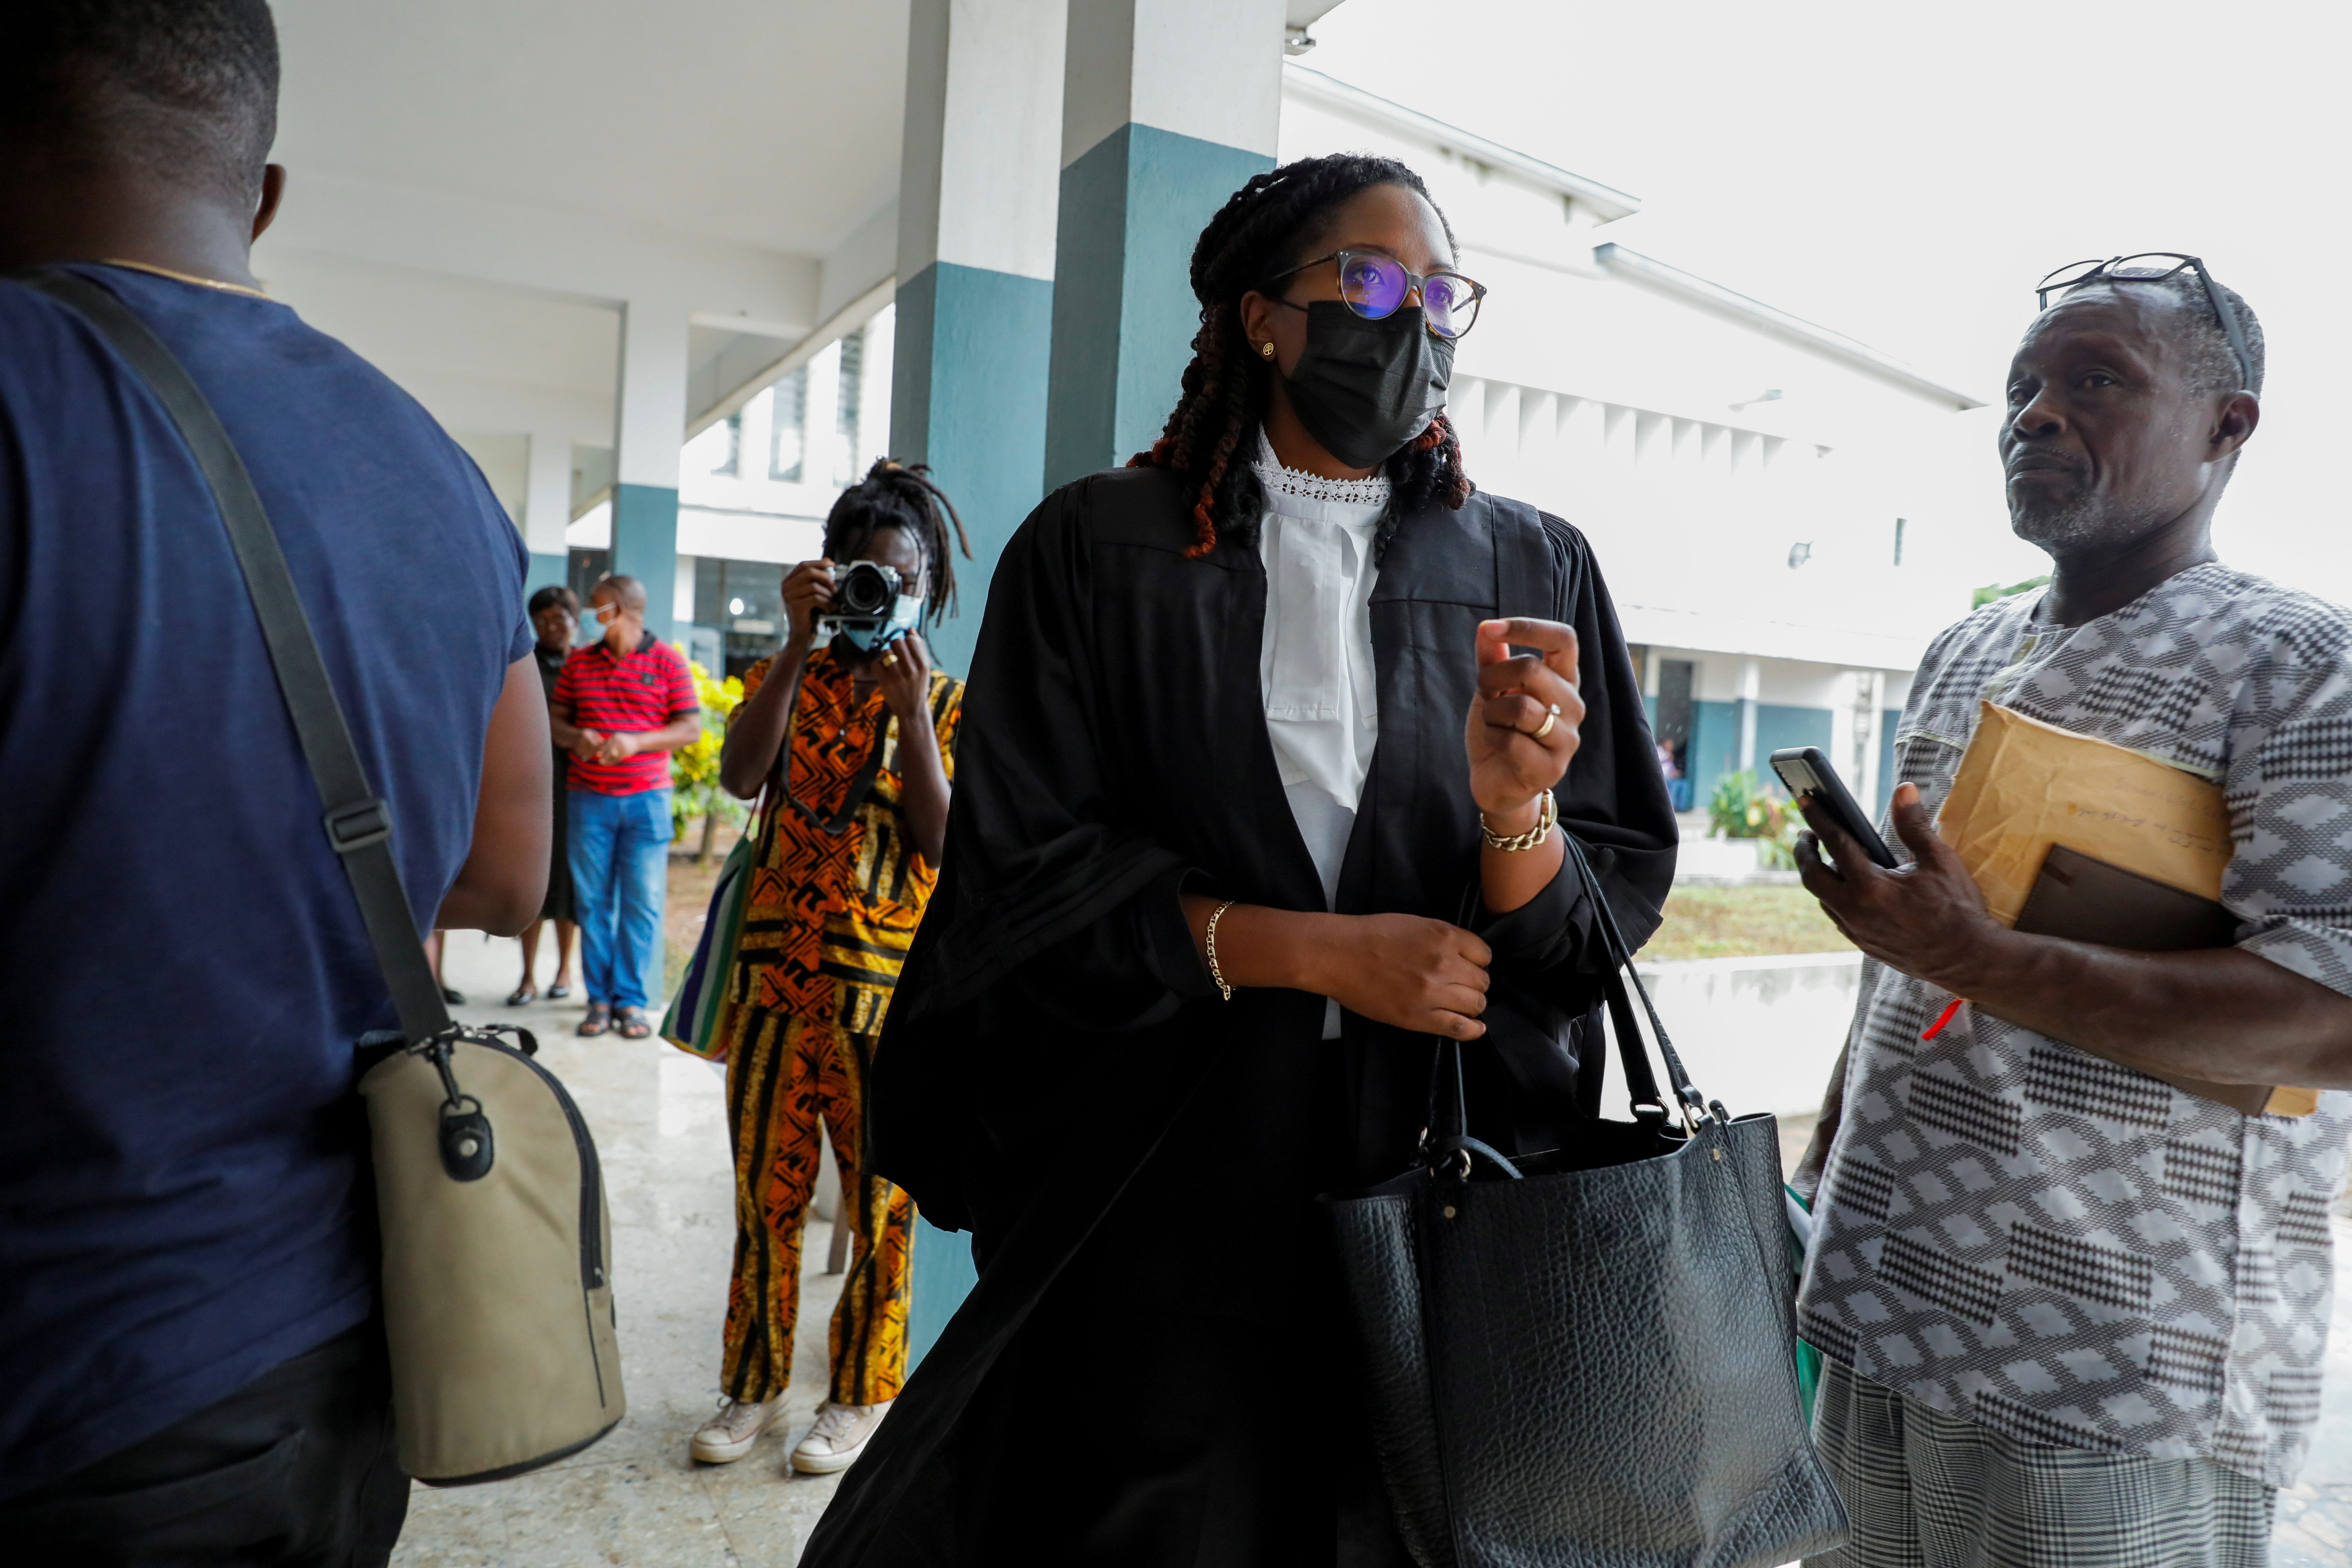  Julia Selman Ayetey, lawyer for  the twenty-one people, who where detained by police and accused of unlawful assembly and promoting an LGBTQ agenda, speaks to journalists at the Ho Circuit Court in Ho, Volta Region, Ghana June 4, 2021. REUTERS/Francis Kokoroko/File Photo